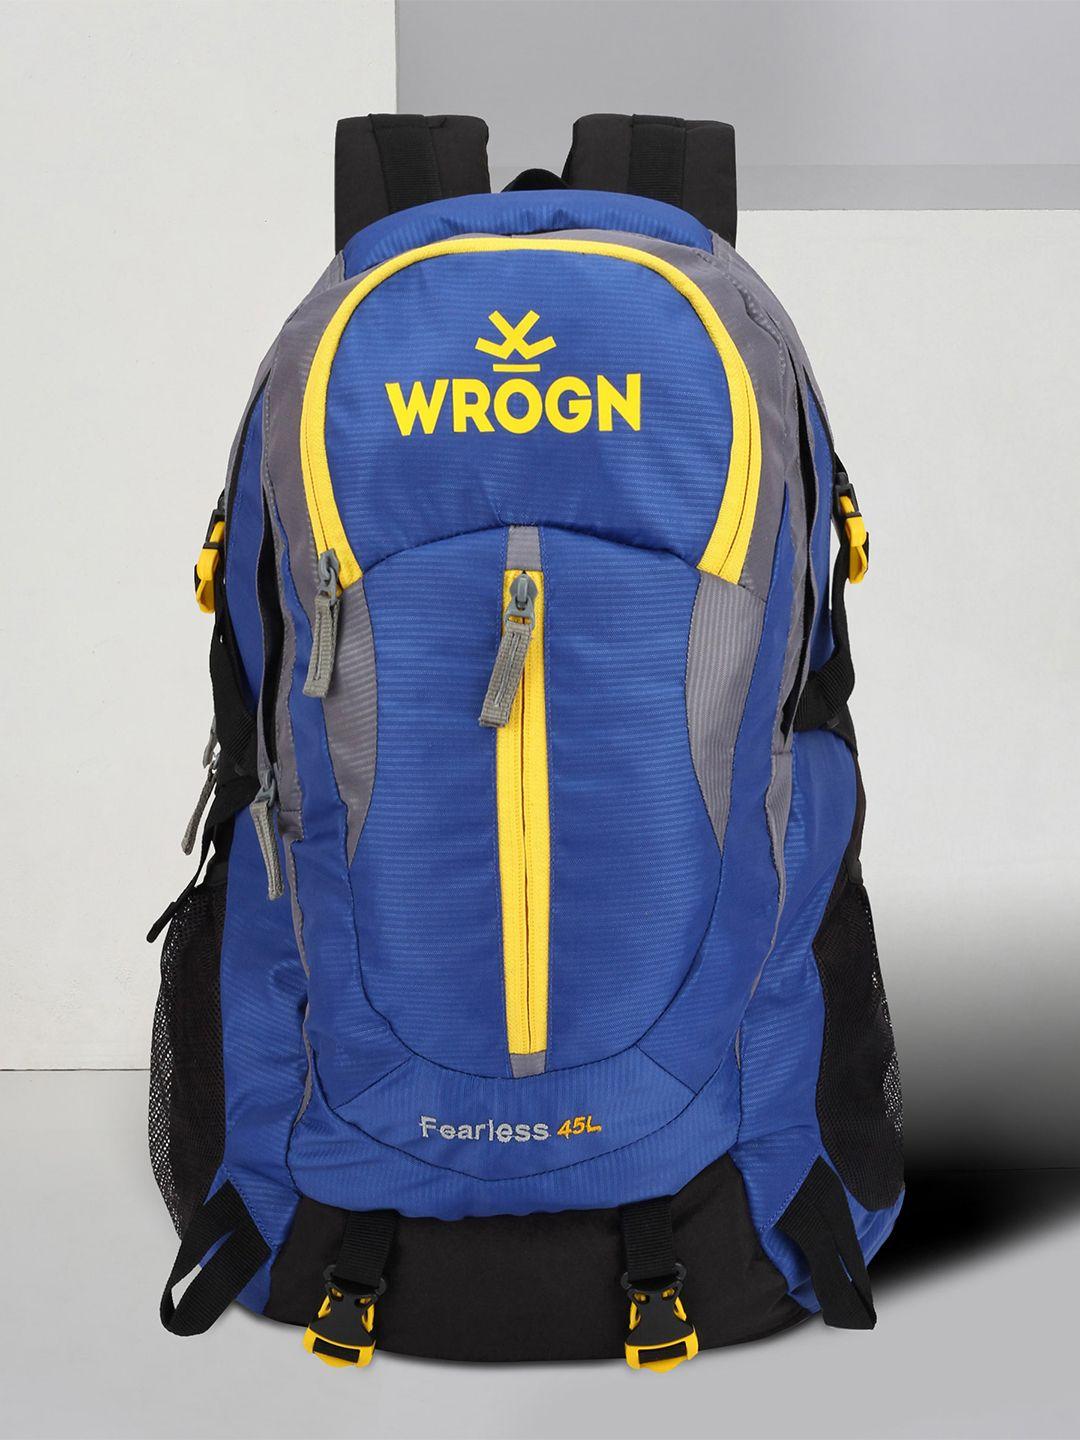 wrogn water resistant brand logo backpack with shoe pocket